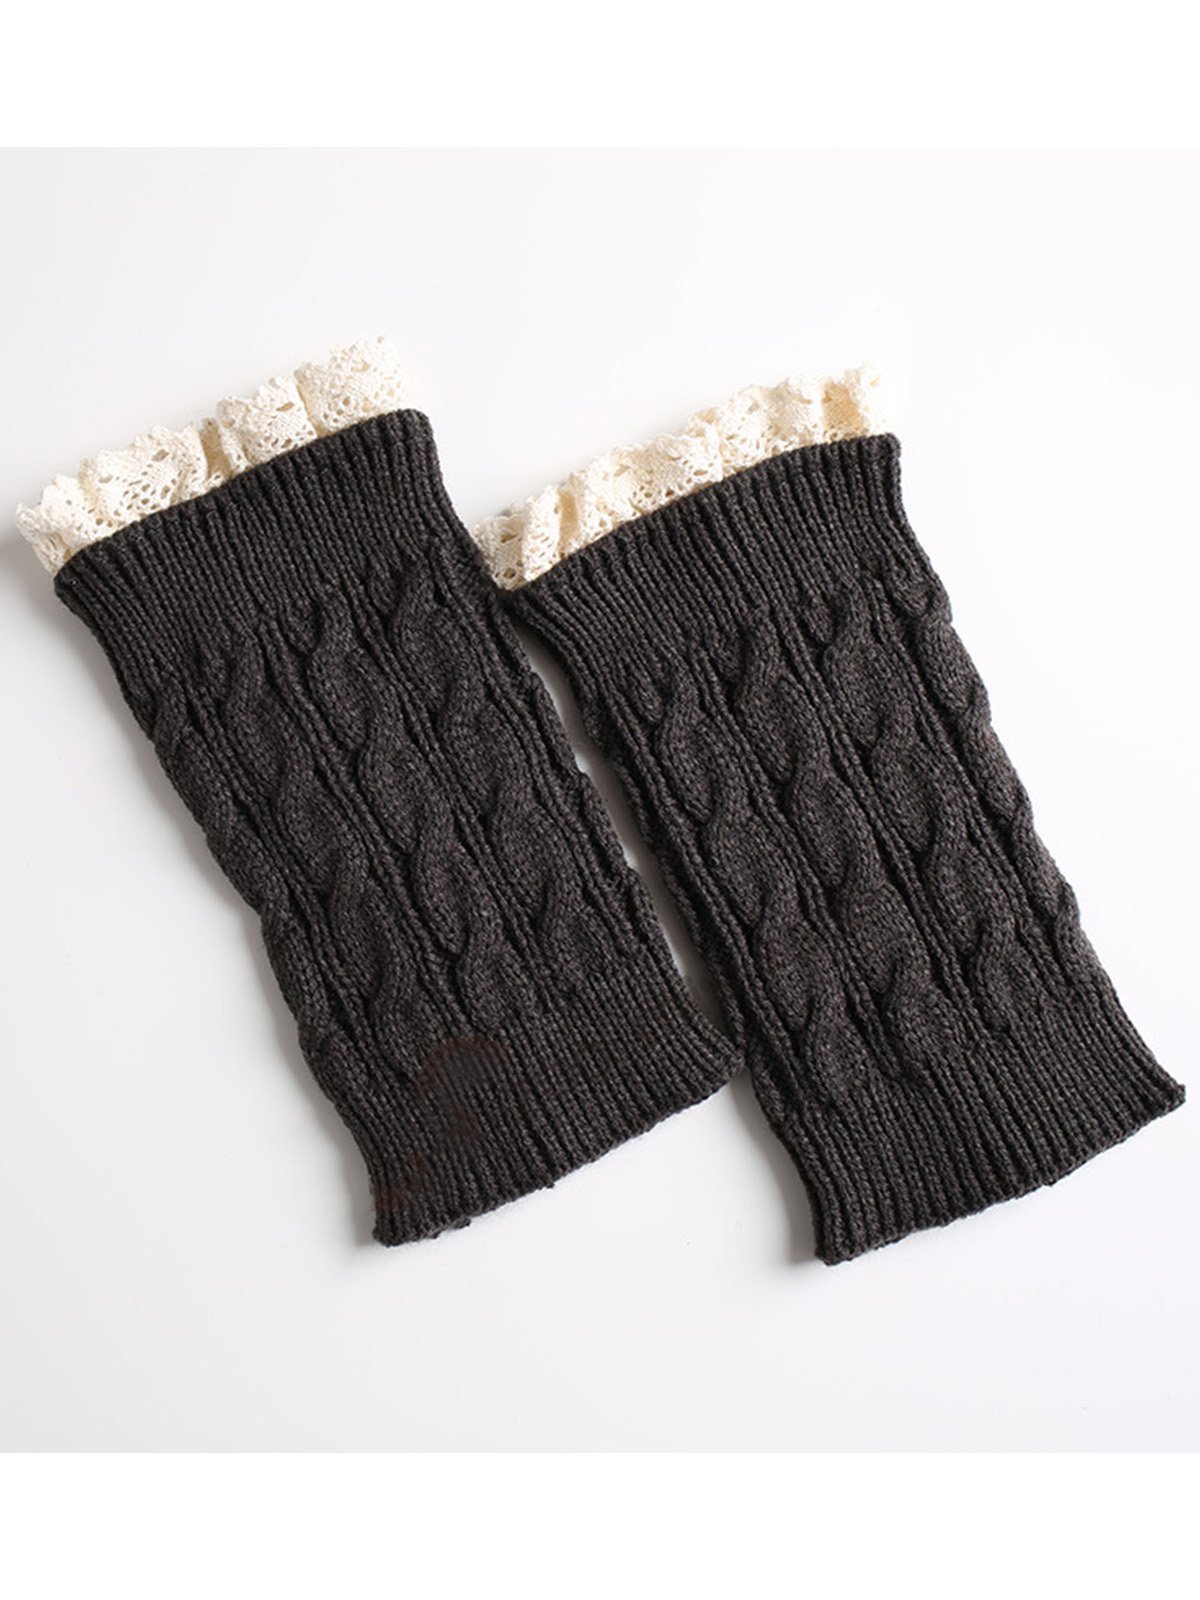 Knitted Lace Ankle Socks